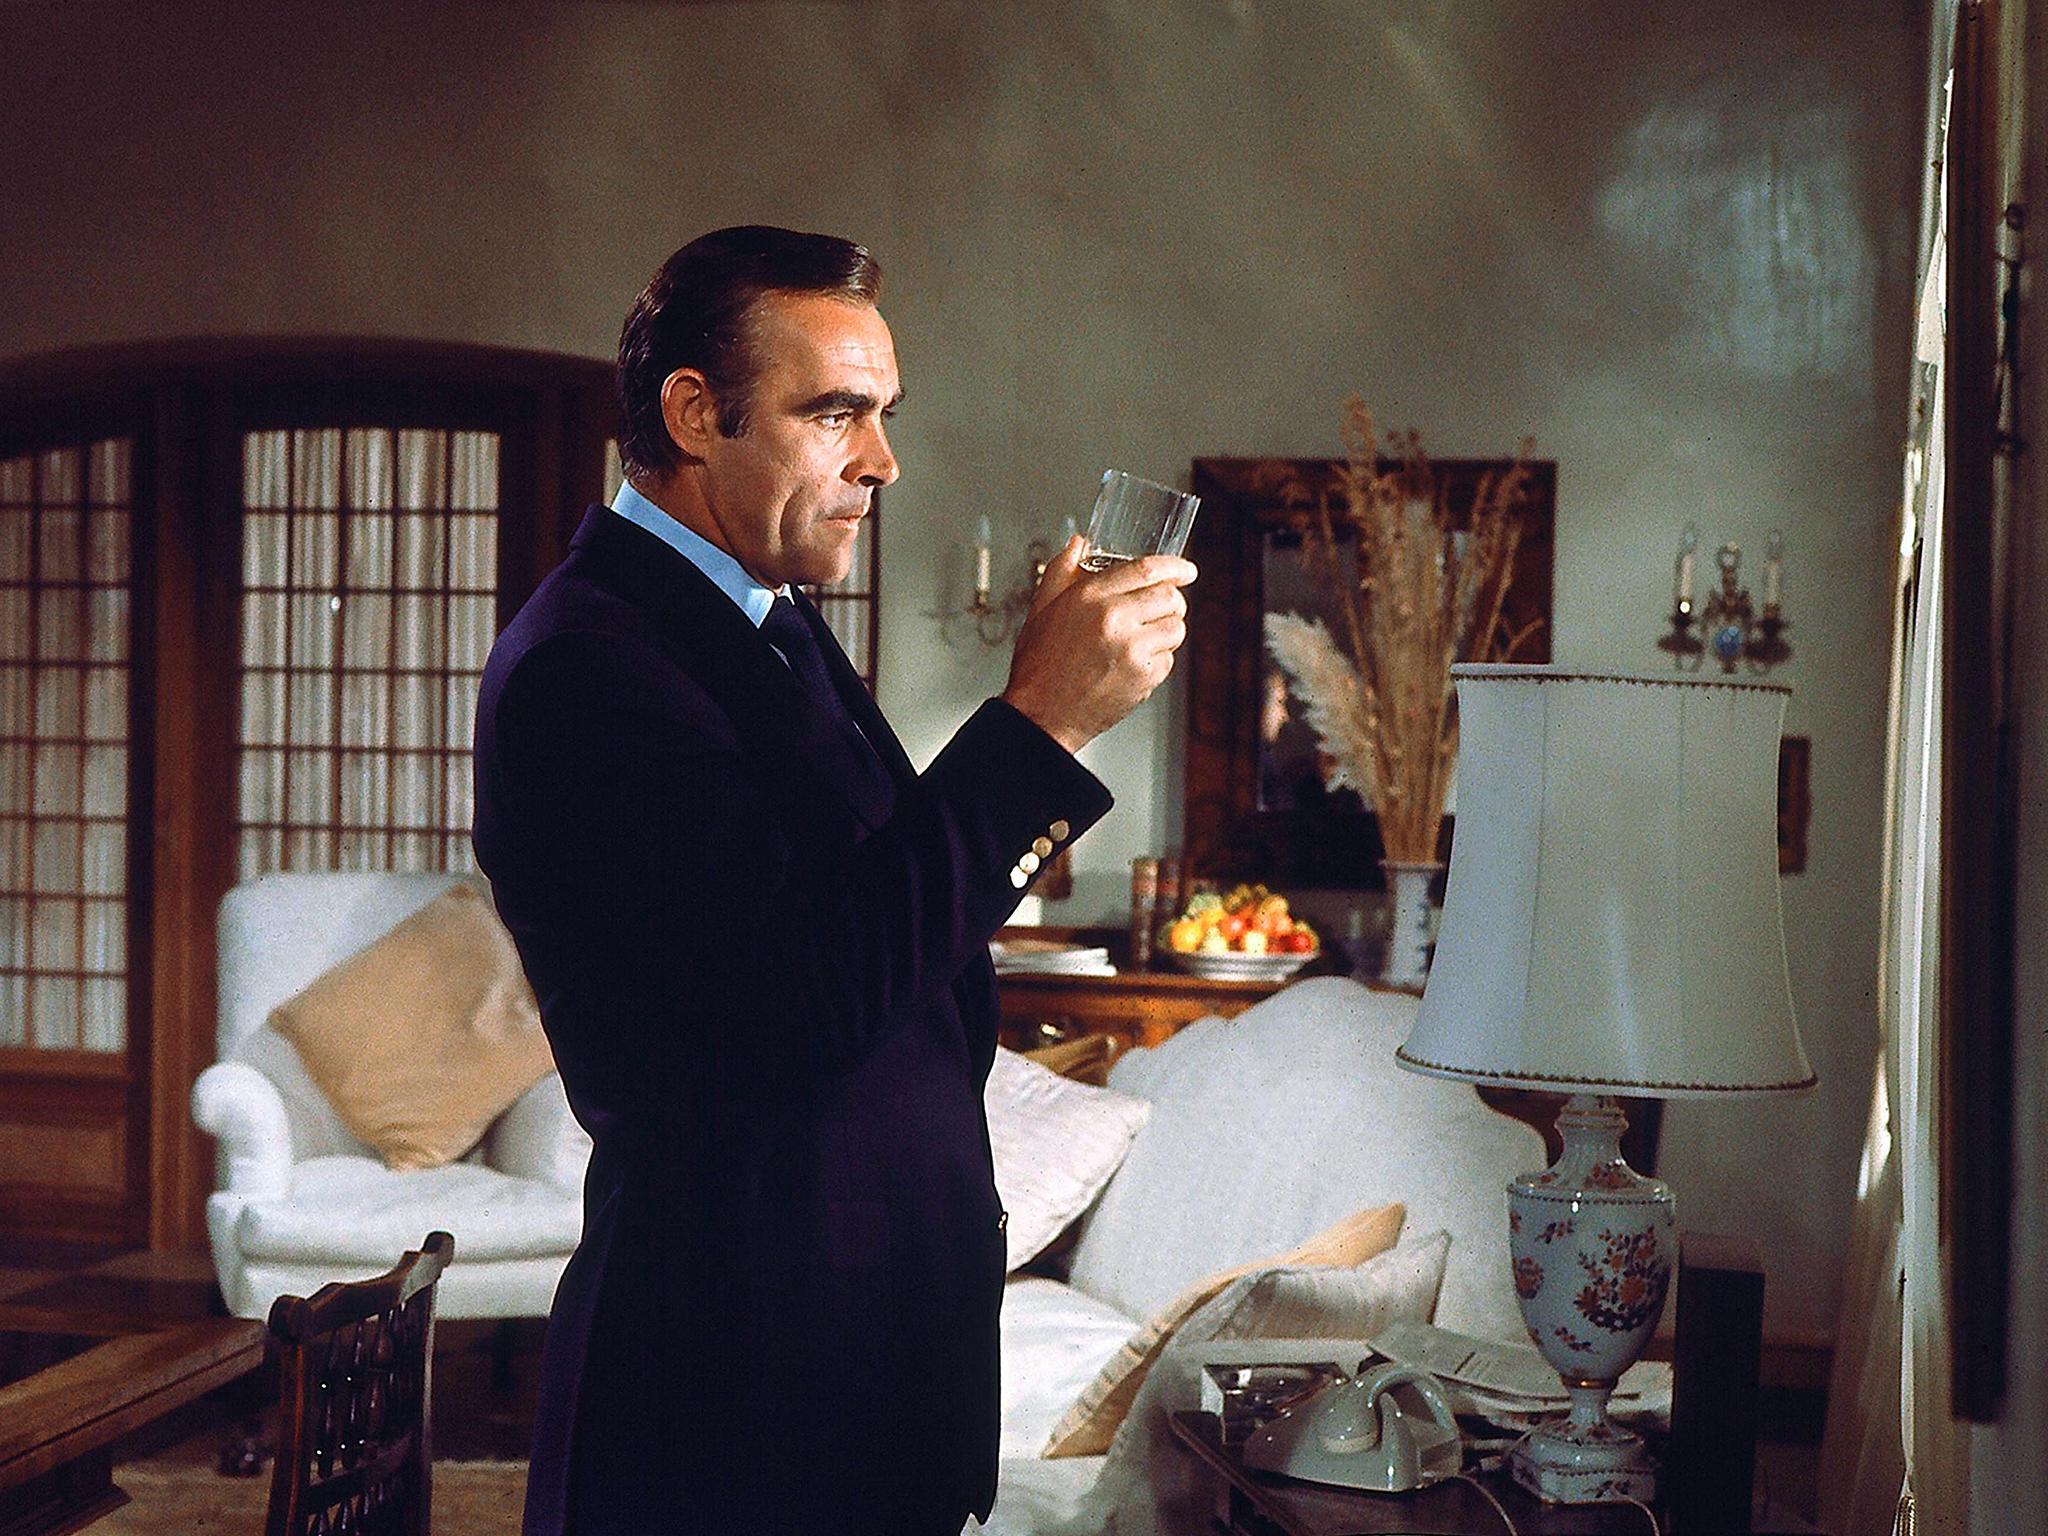 Sean Connery in 'Diamonds Are Forever' with an essential scotch